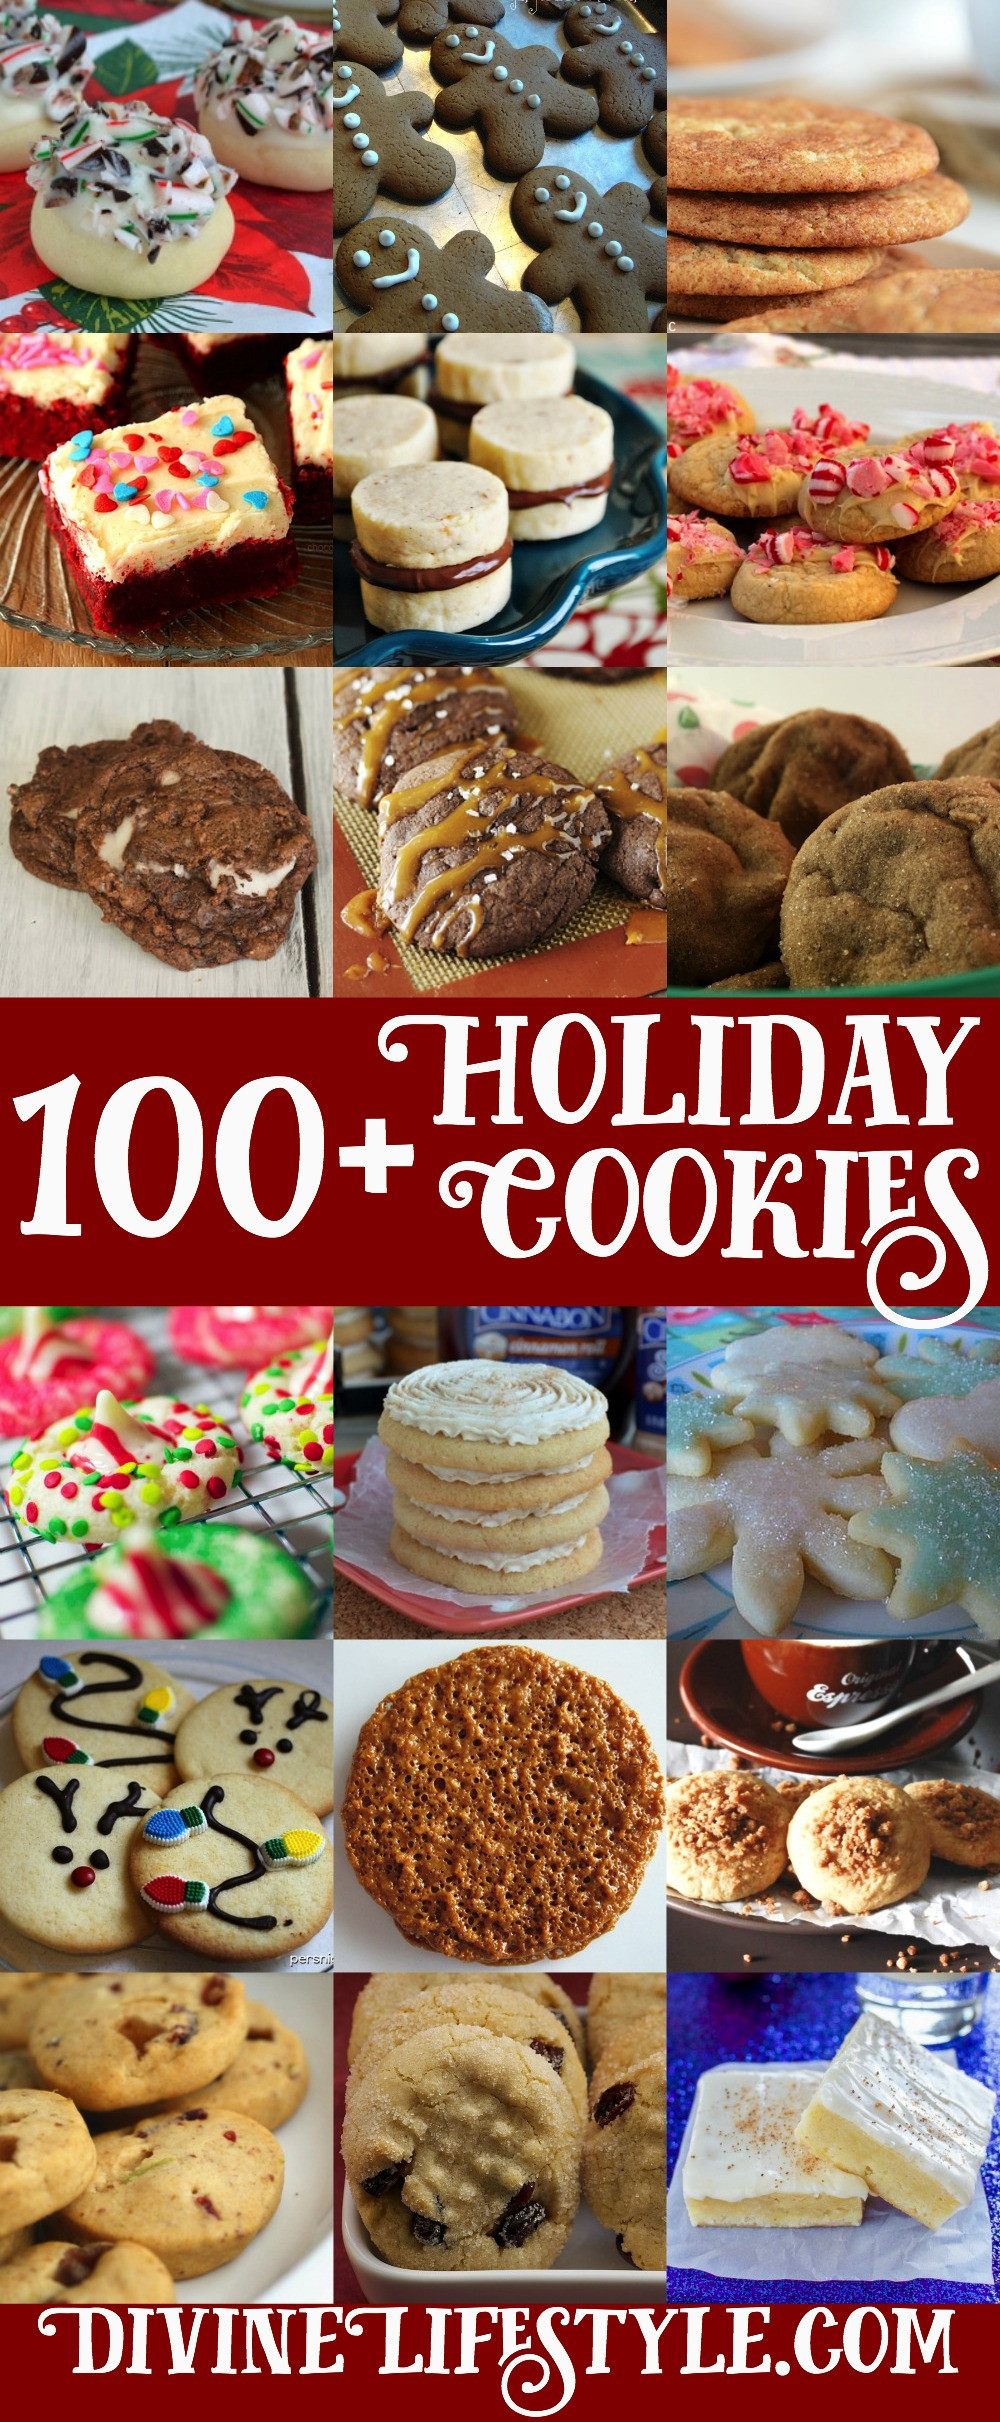 Christmas Cookies List
 Ultimate List of 100 Holiday Cookies Recipes